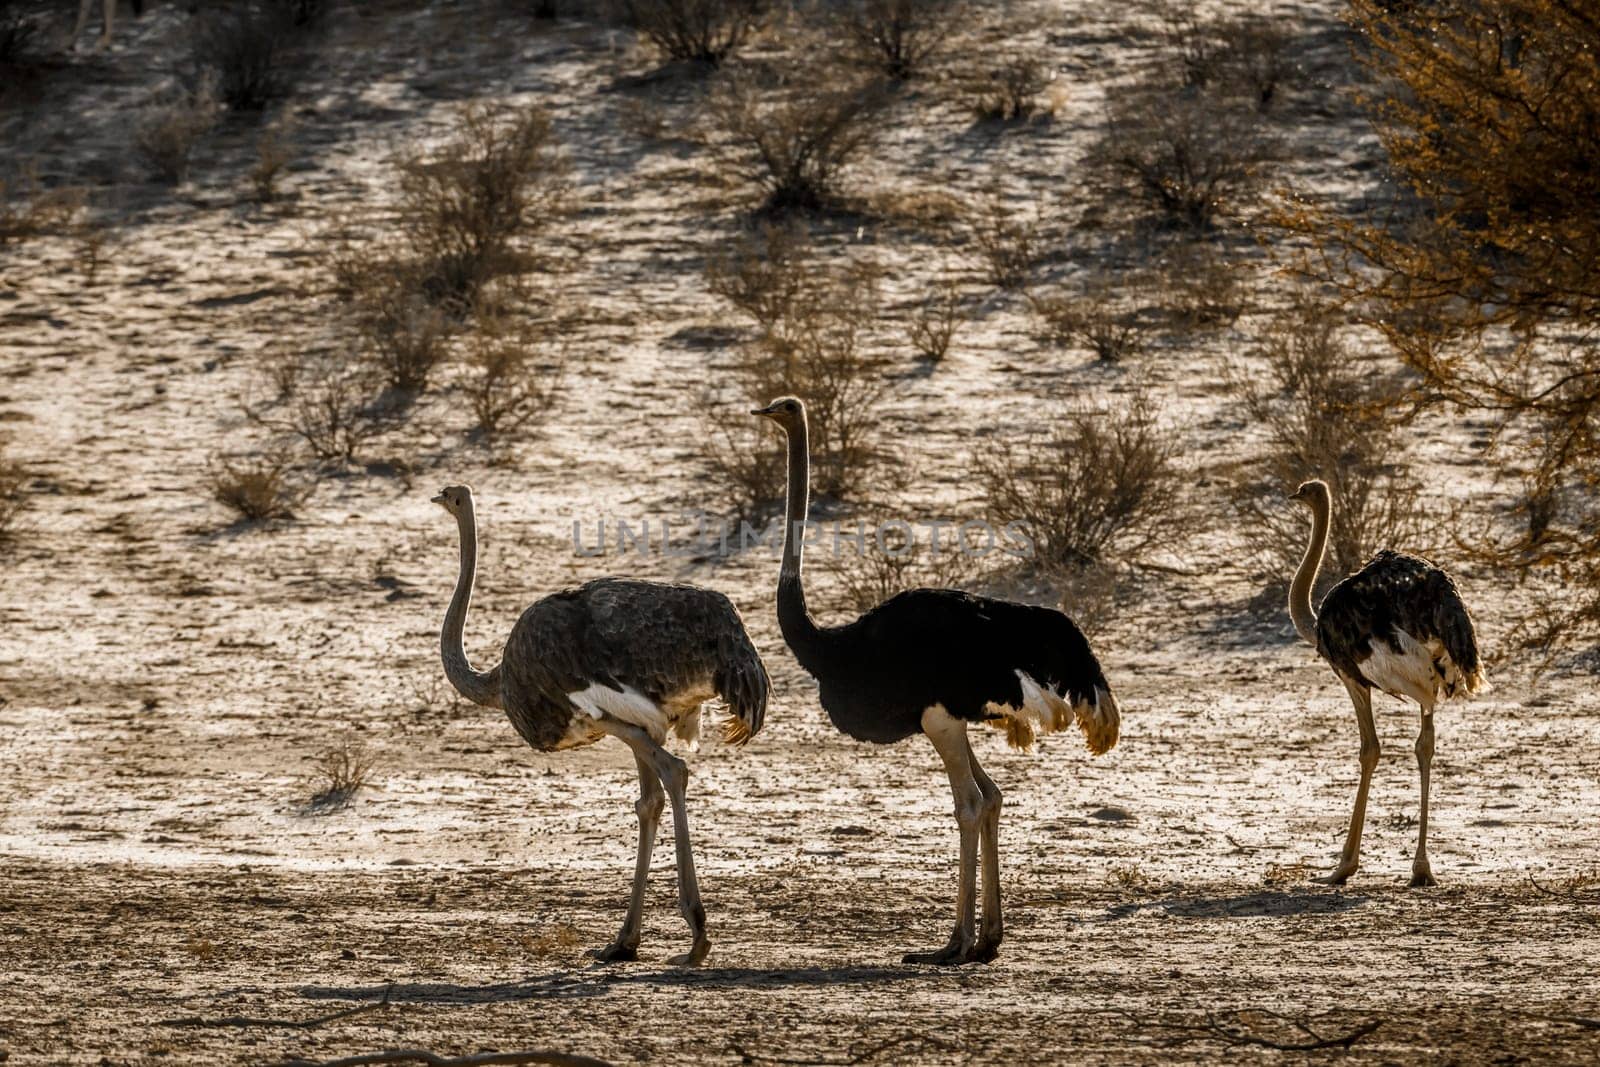 African Ostrich in Kgalagadi transfrontier park, South Africa by PACOCOMO